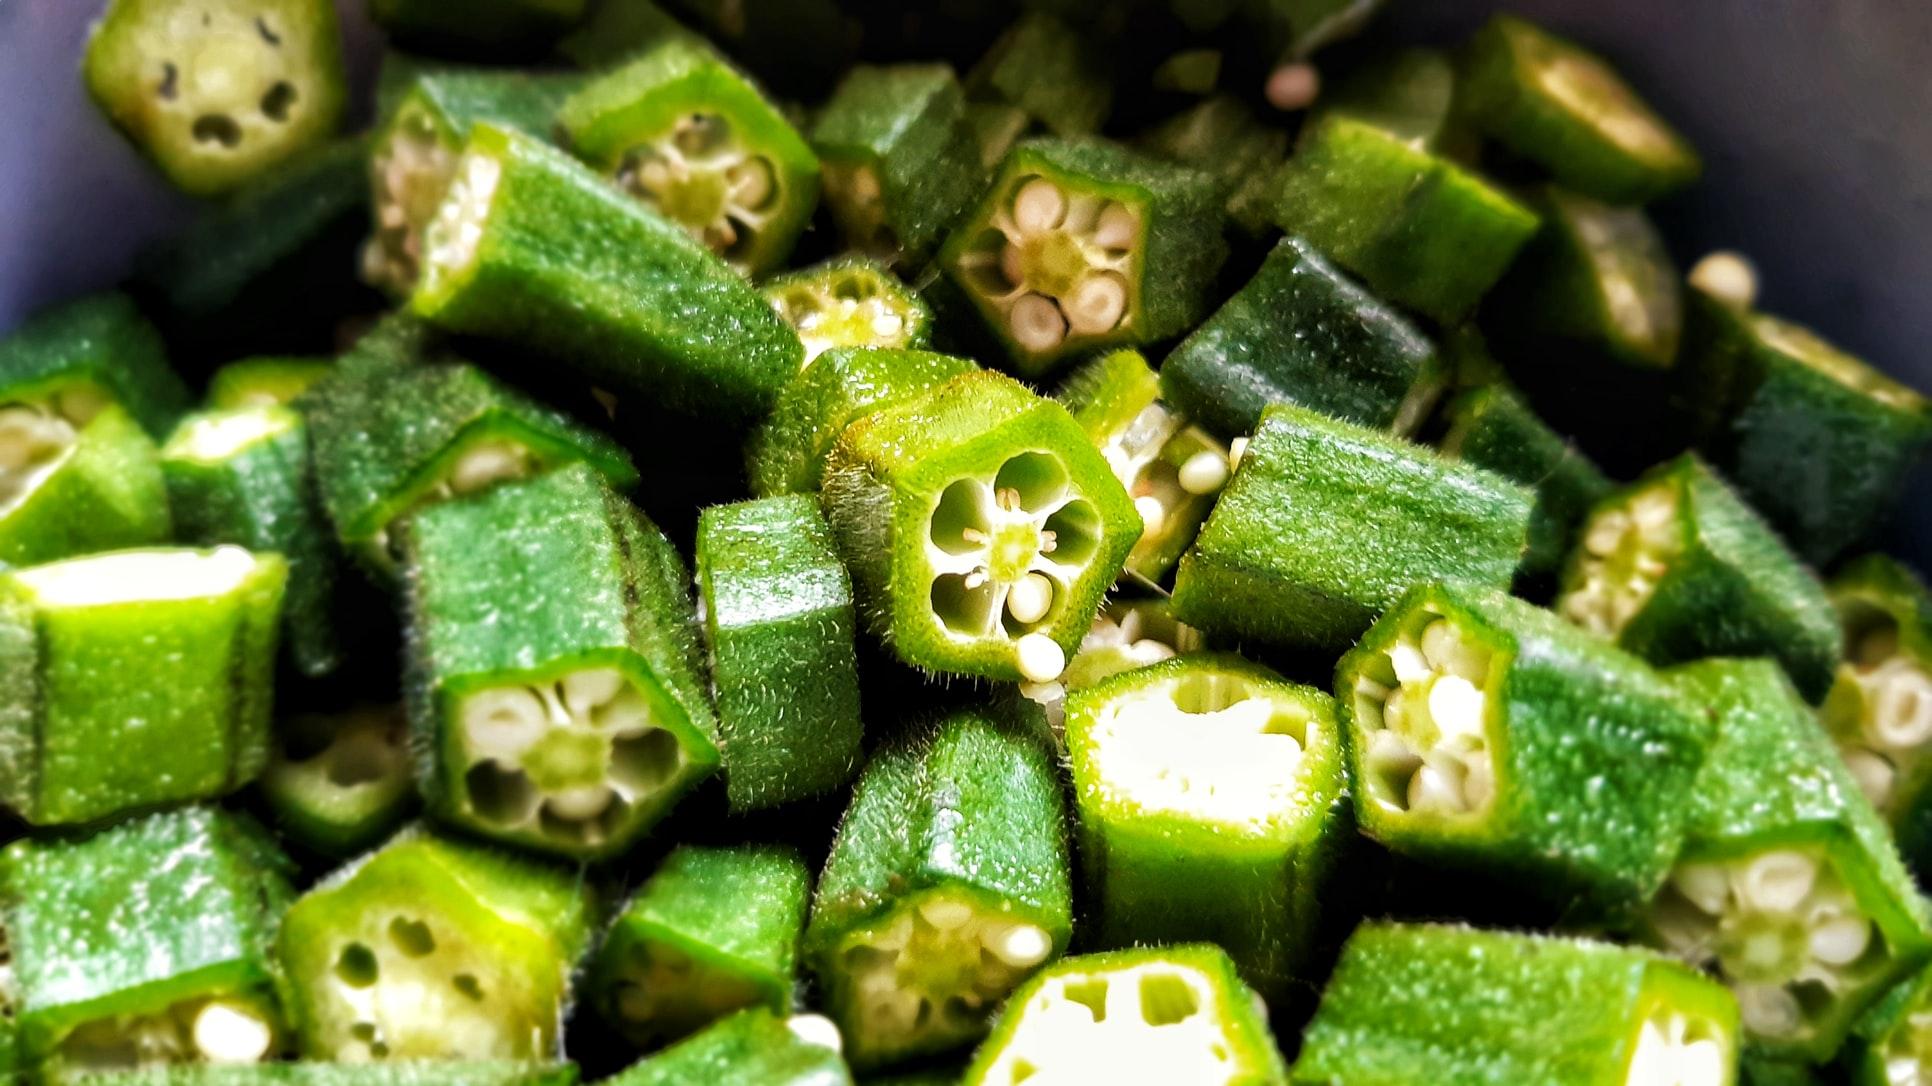 Goo made from okra can filter microplastics out of water